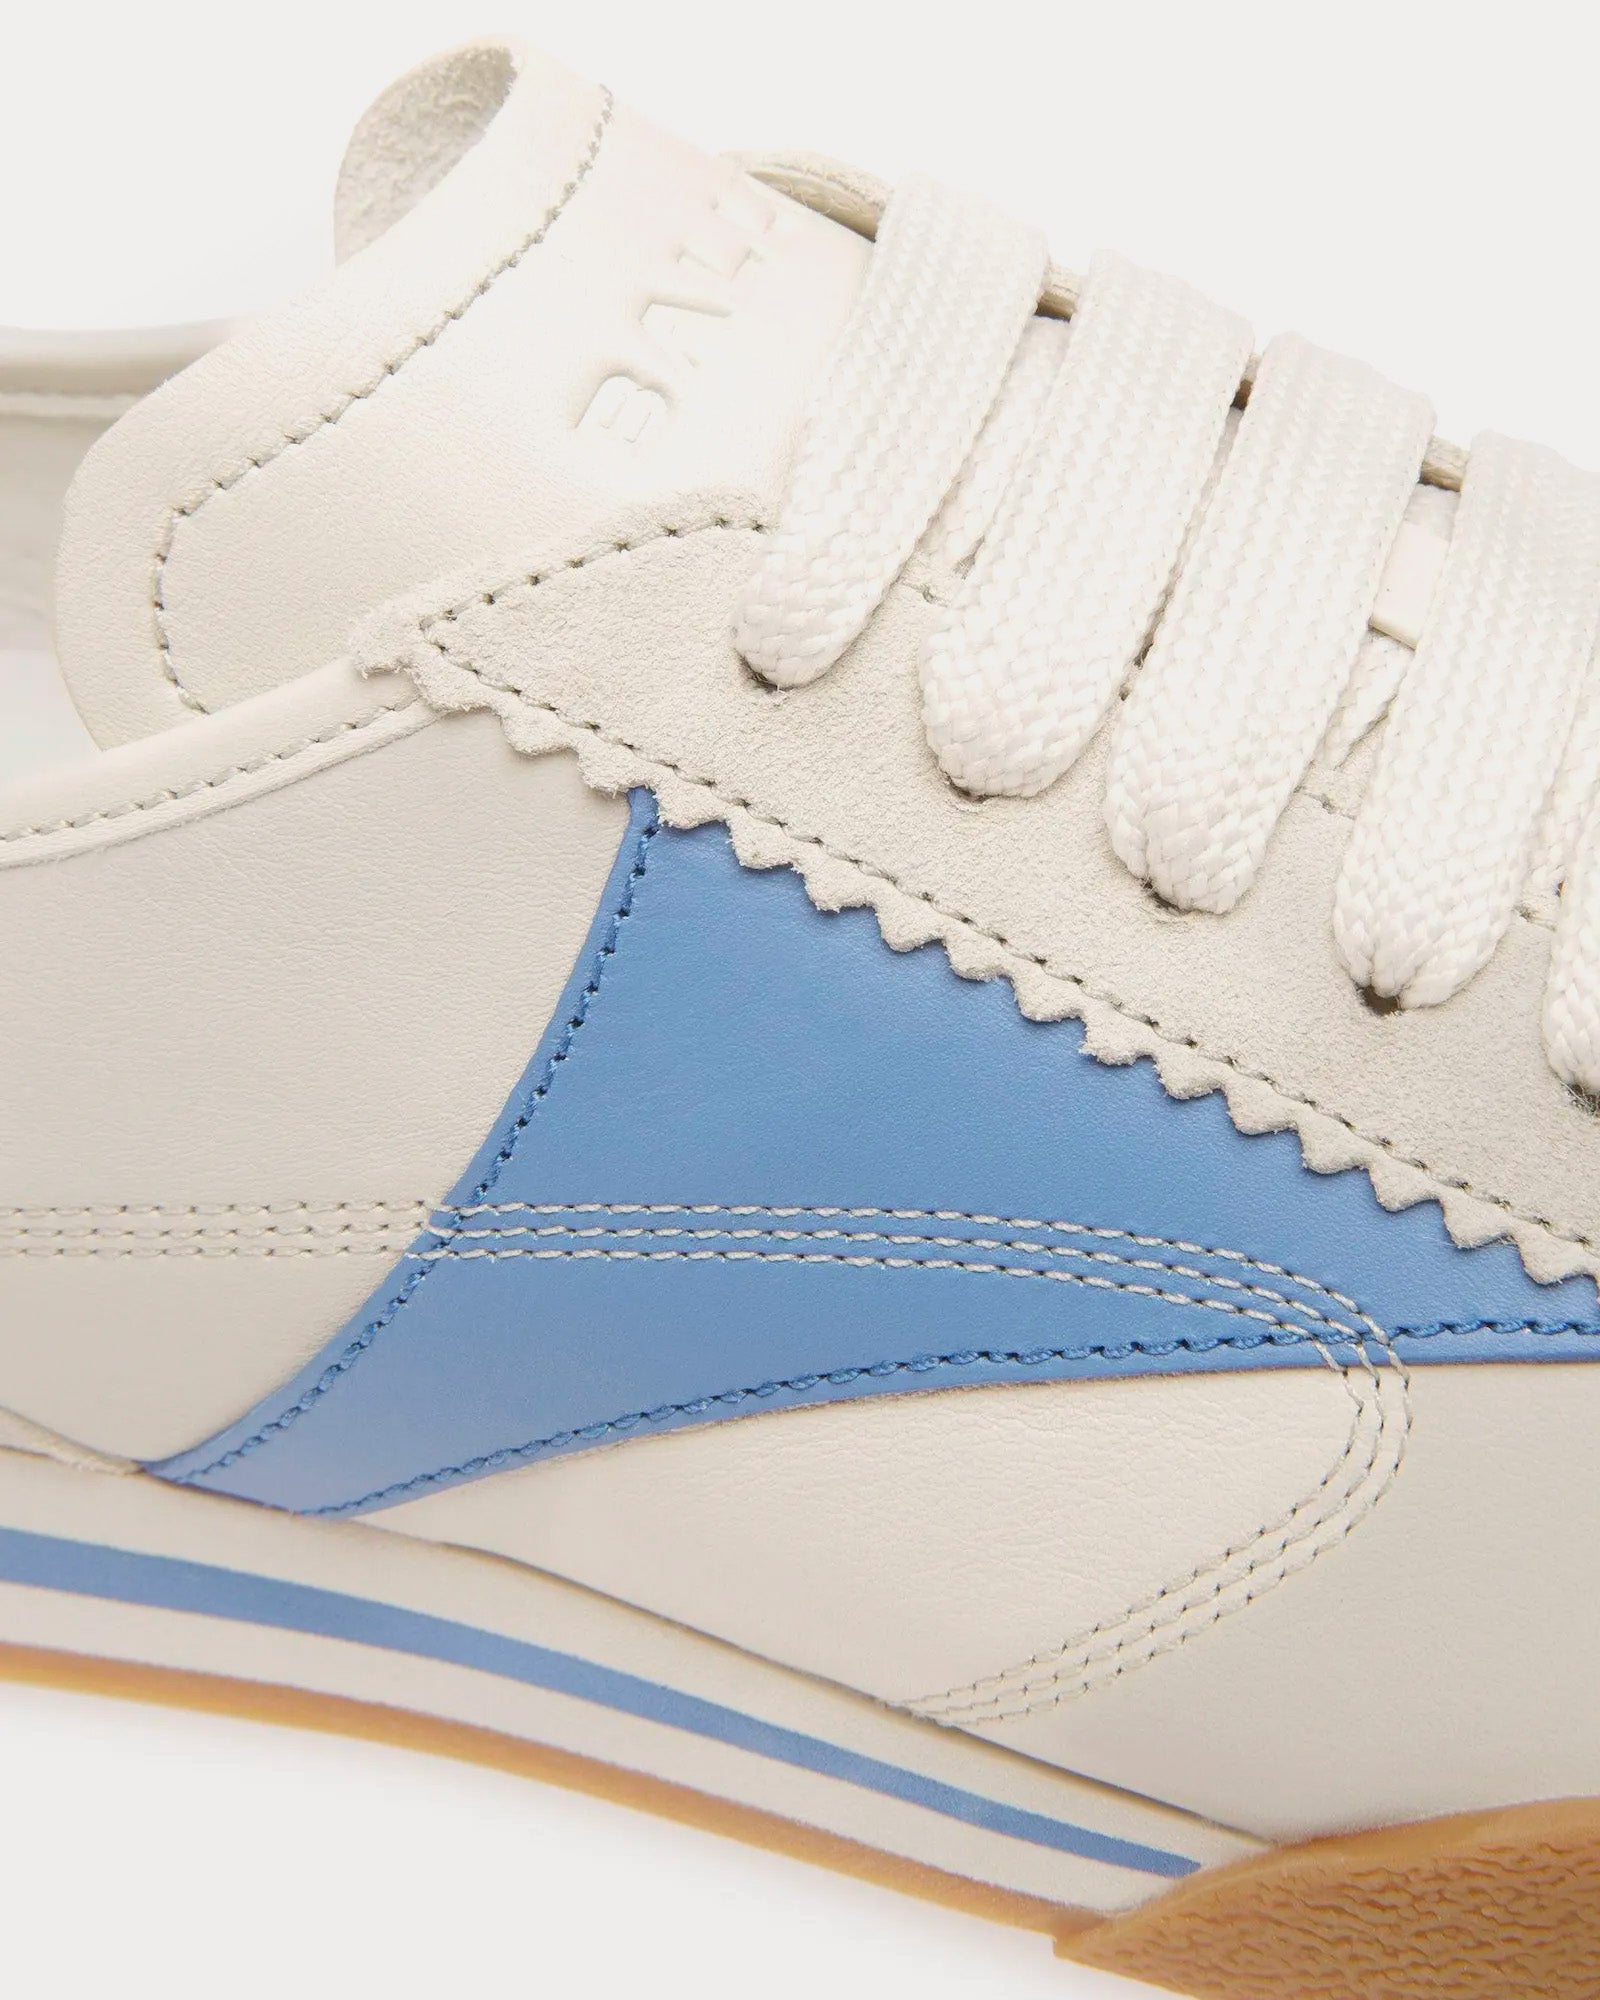 Bally - Sussex Leather Dusty White / Blue Low Top Sneakers